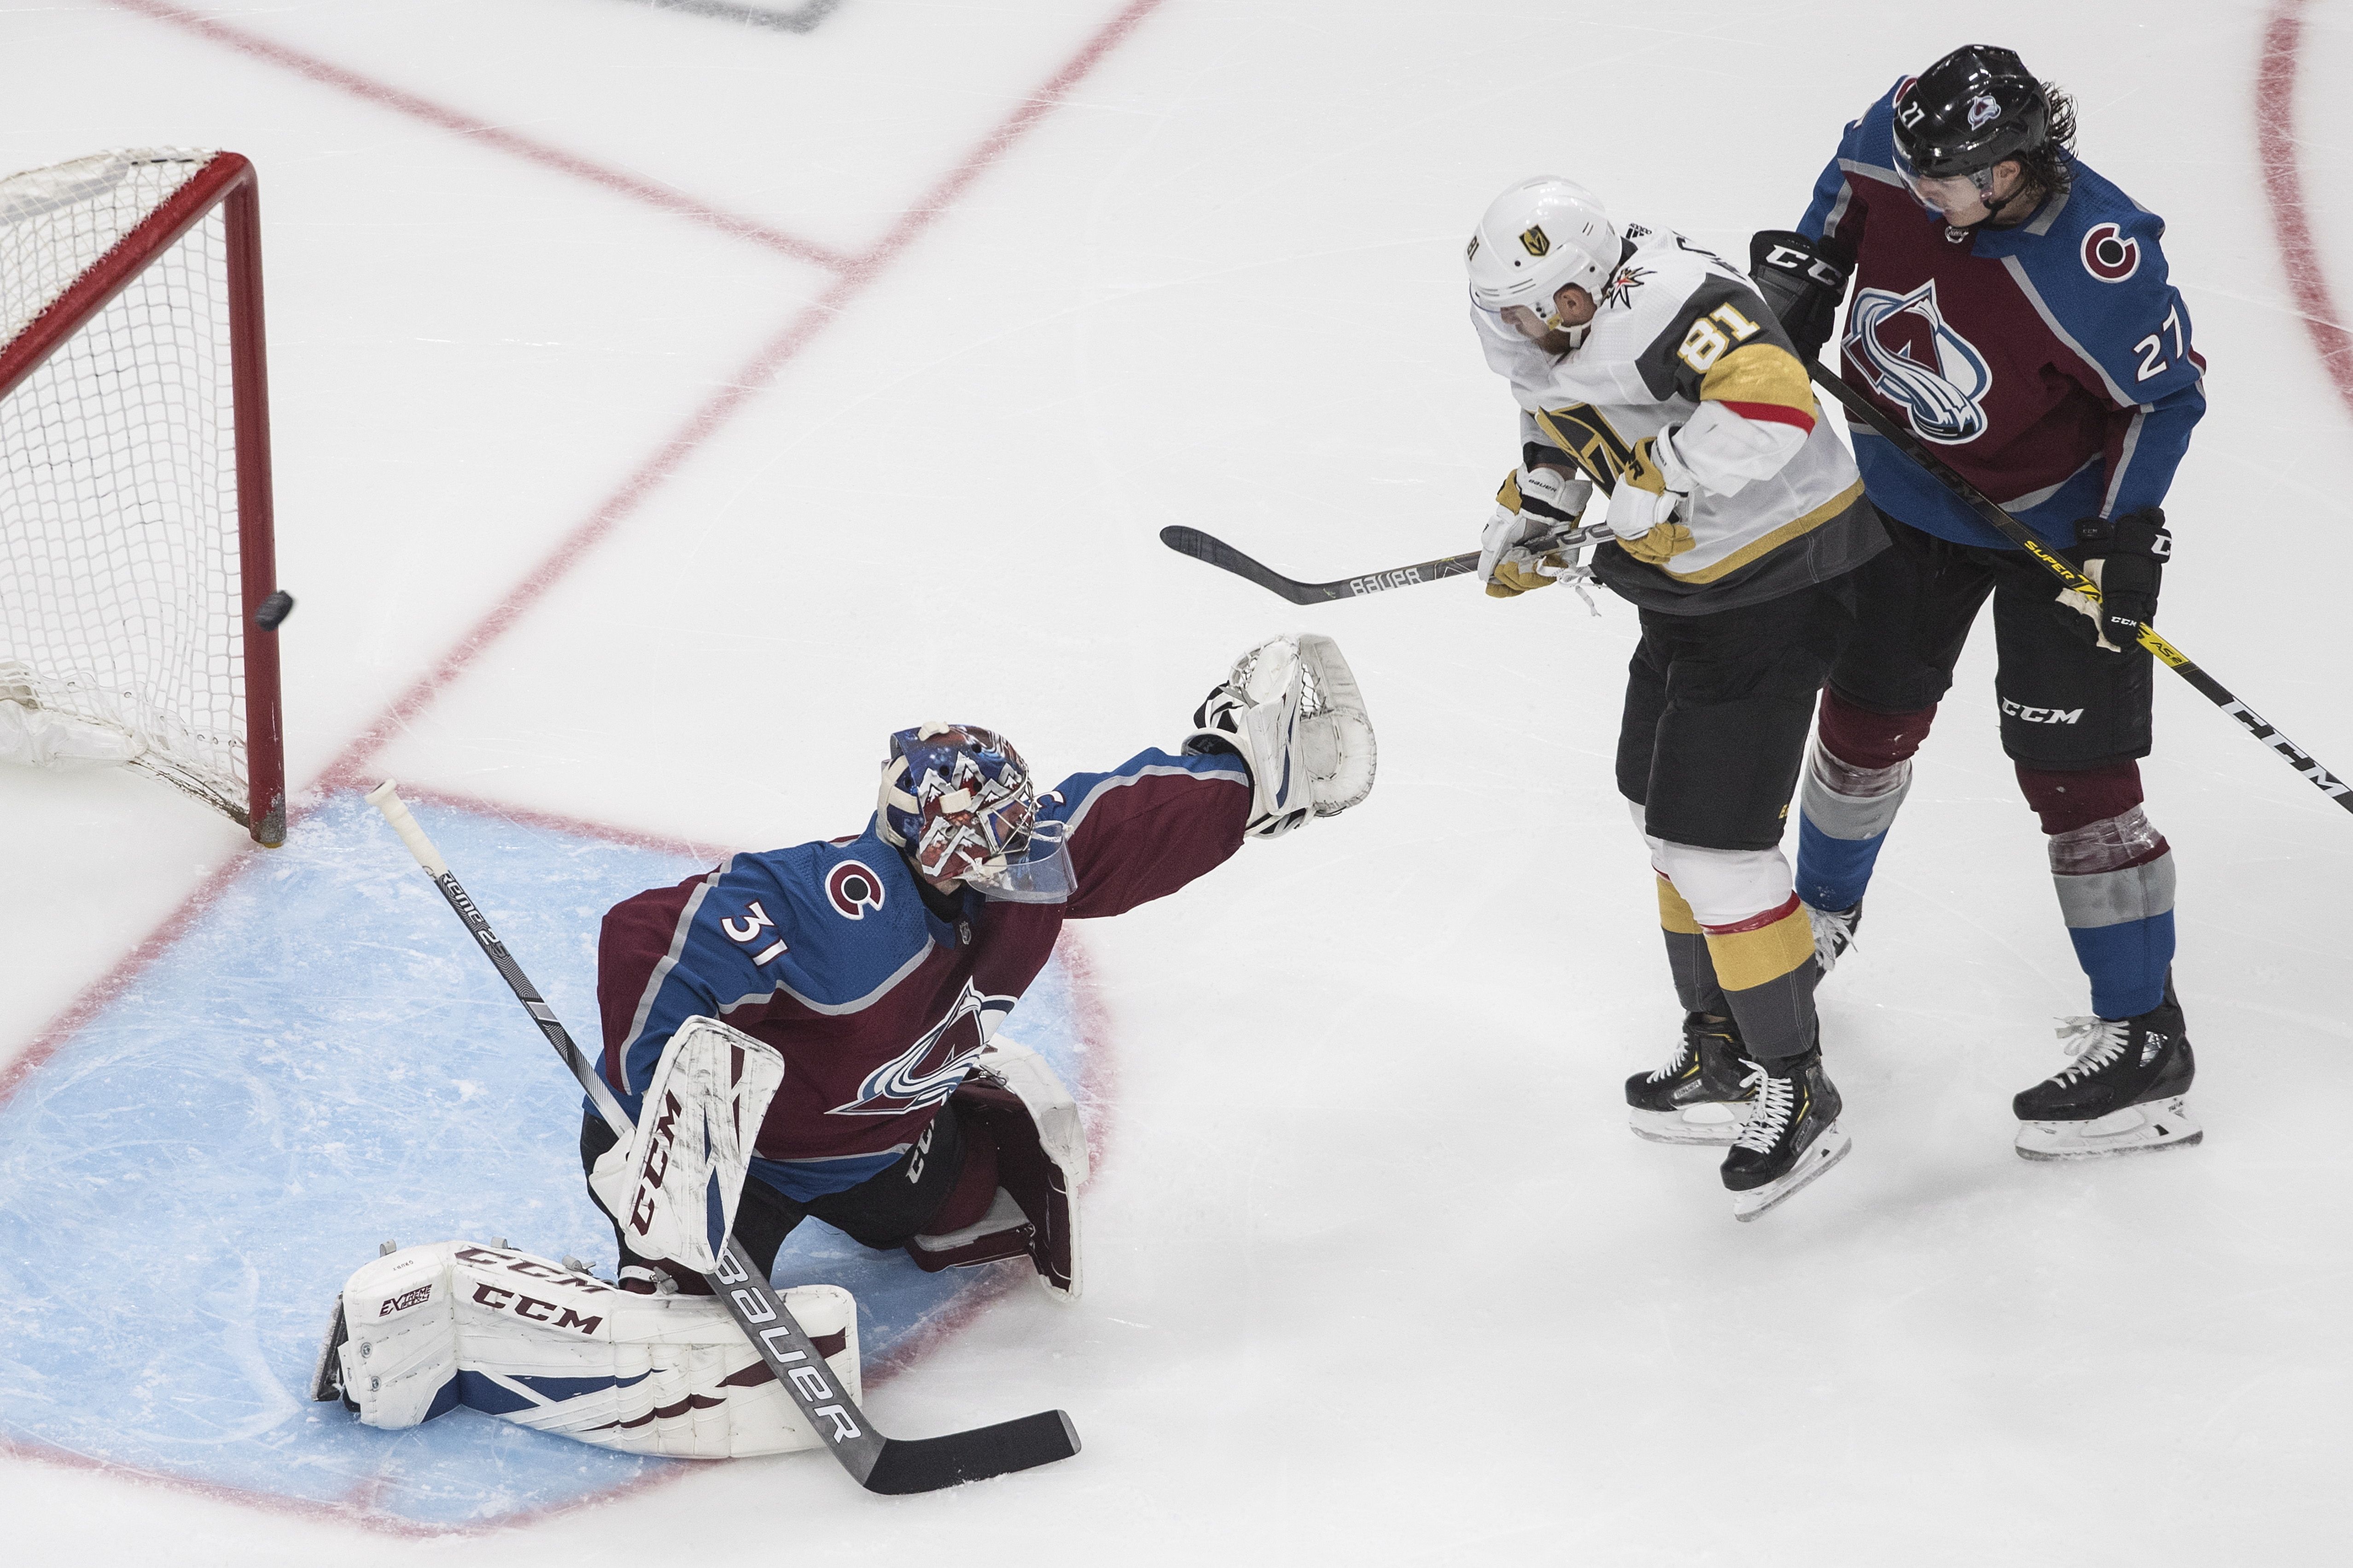 Vegas Golden Knights: Fun takeaways from 2020 NHL All-Star Game - Page 2